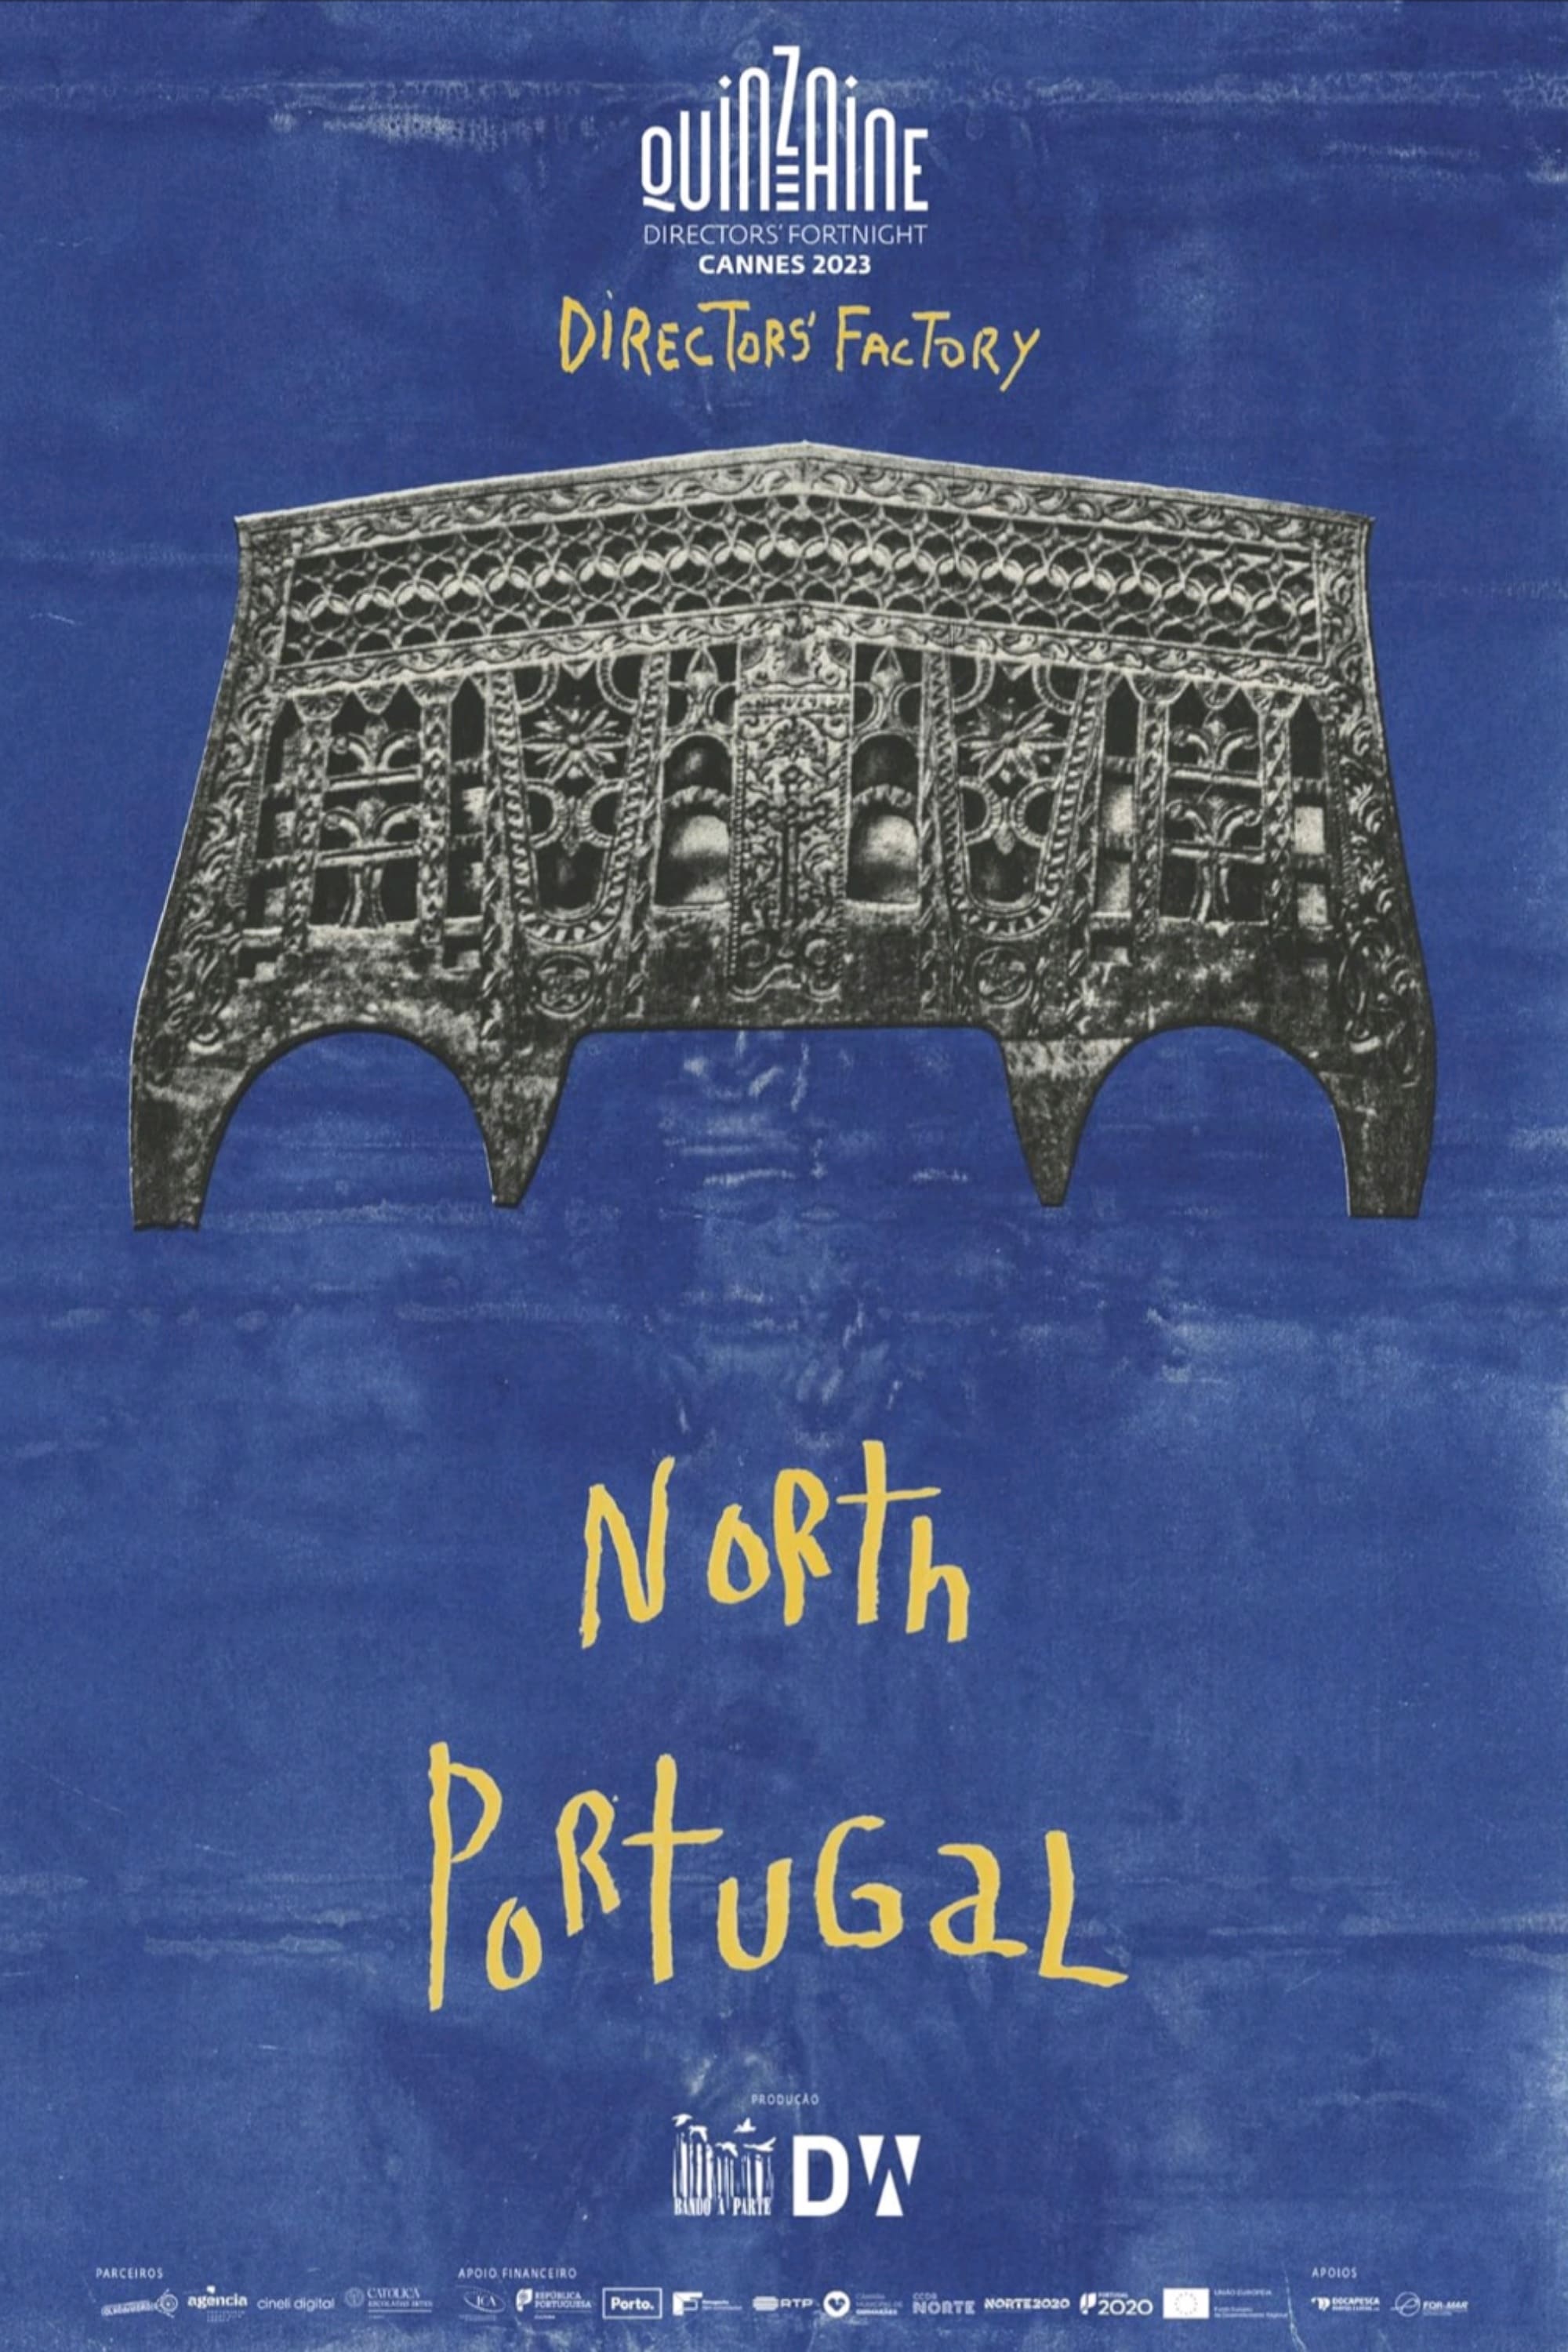 Director’s Factory: North Portugal